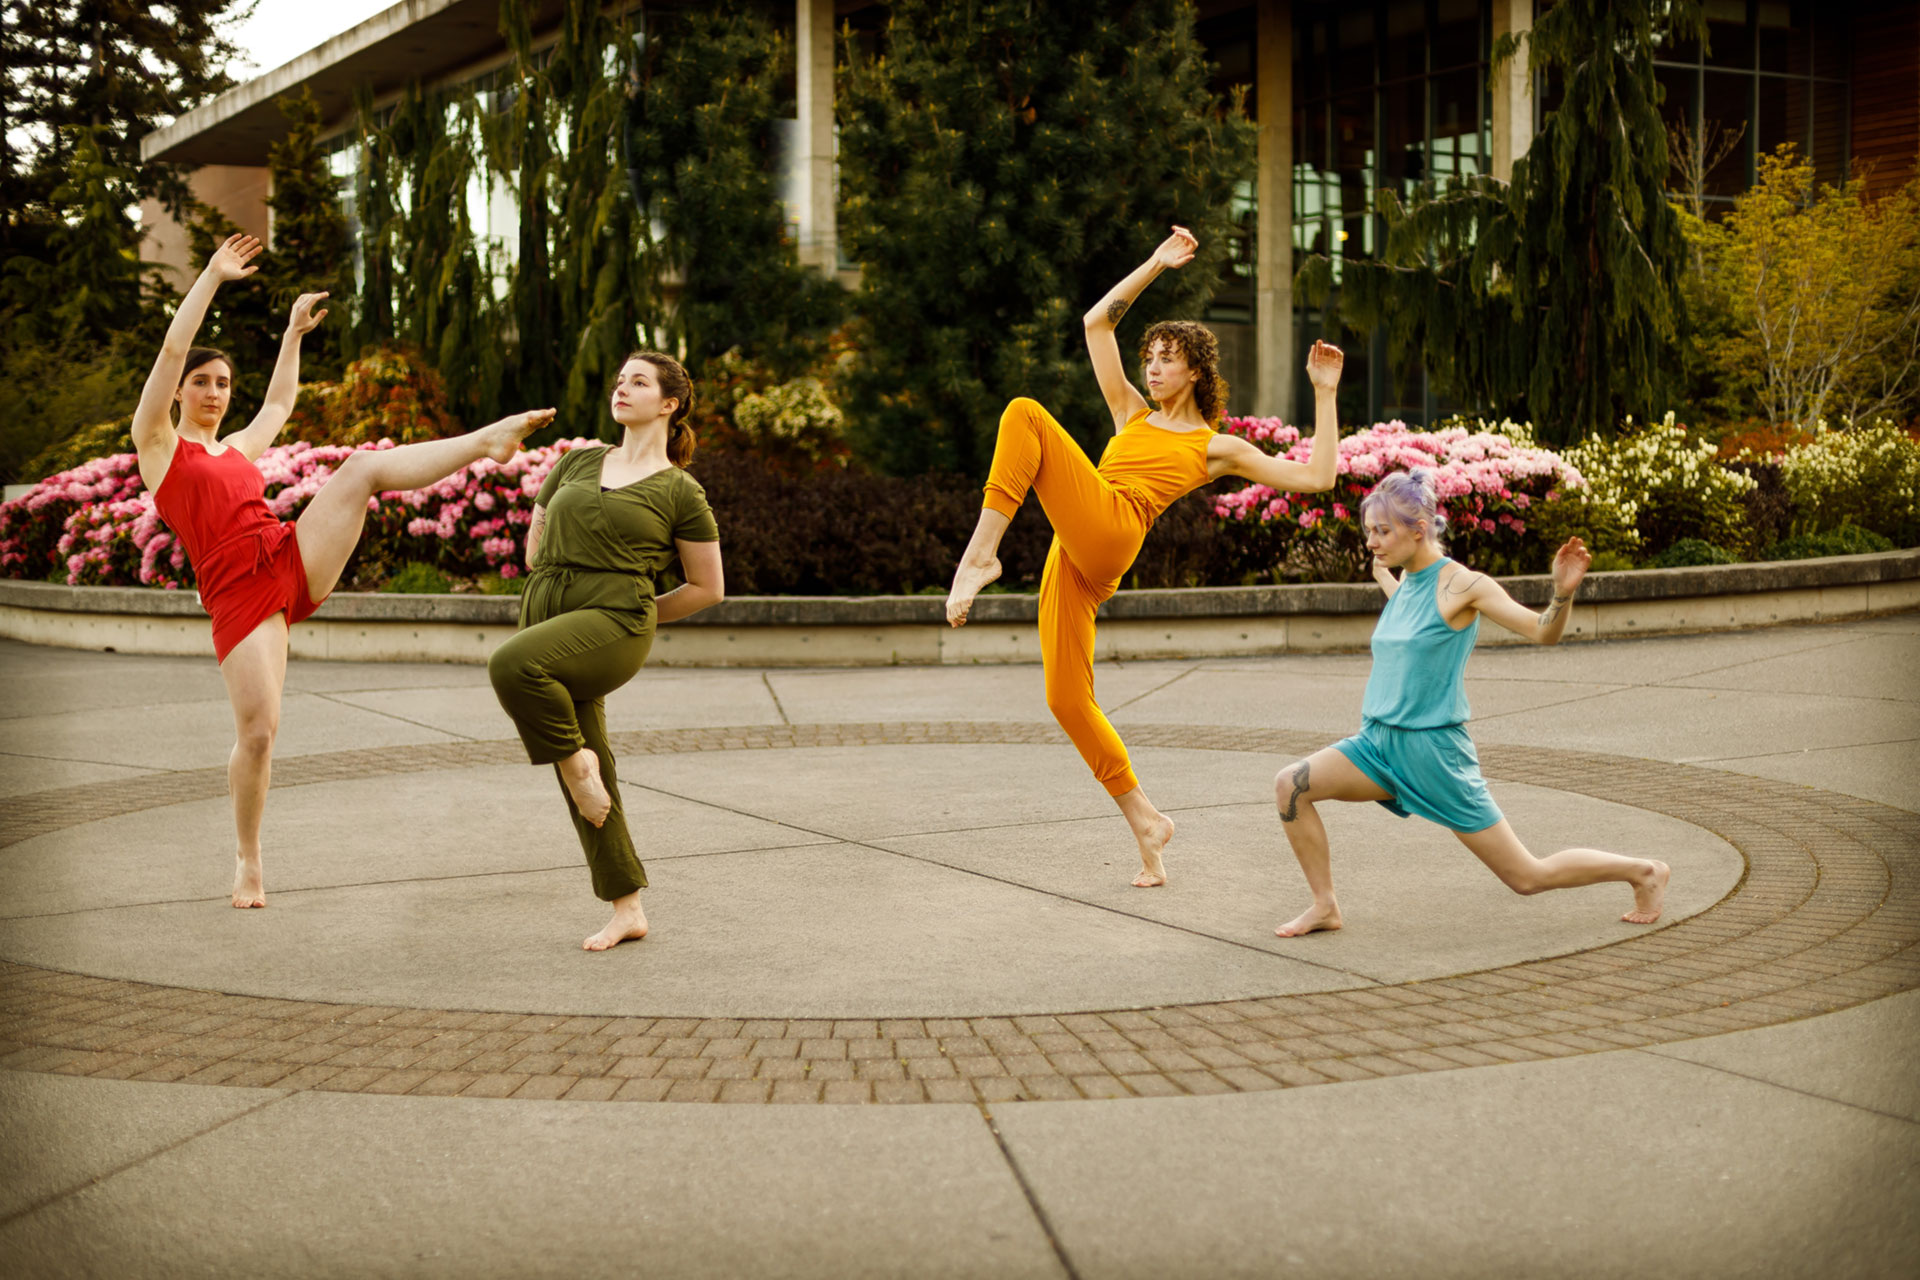 Four dancers posing in different ways inside a circular paved area in front of a garden